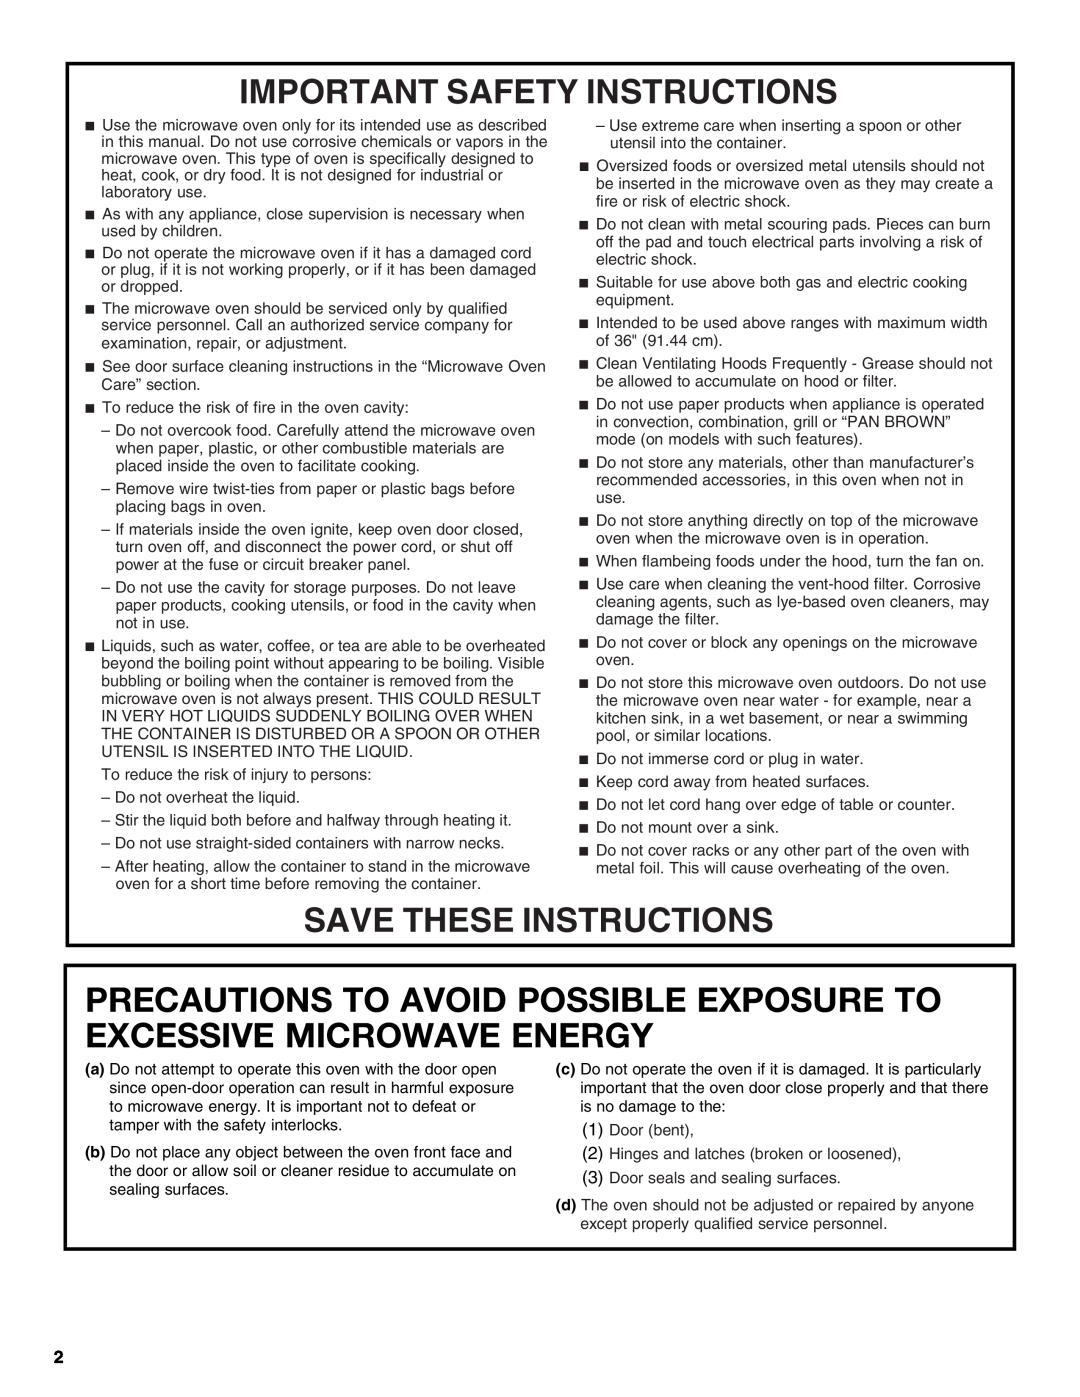 Whirlpool WMH53520AB Precautions To Avoid Possible Exposure To Excessive Microwave Energy, Important Safety Instructions 